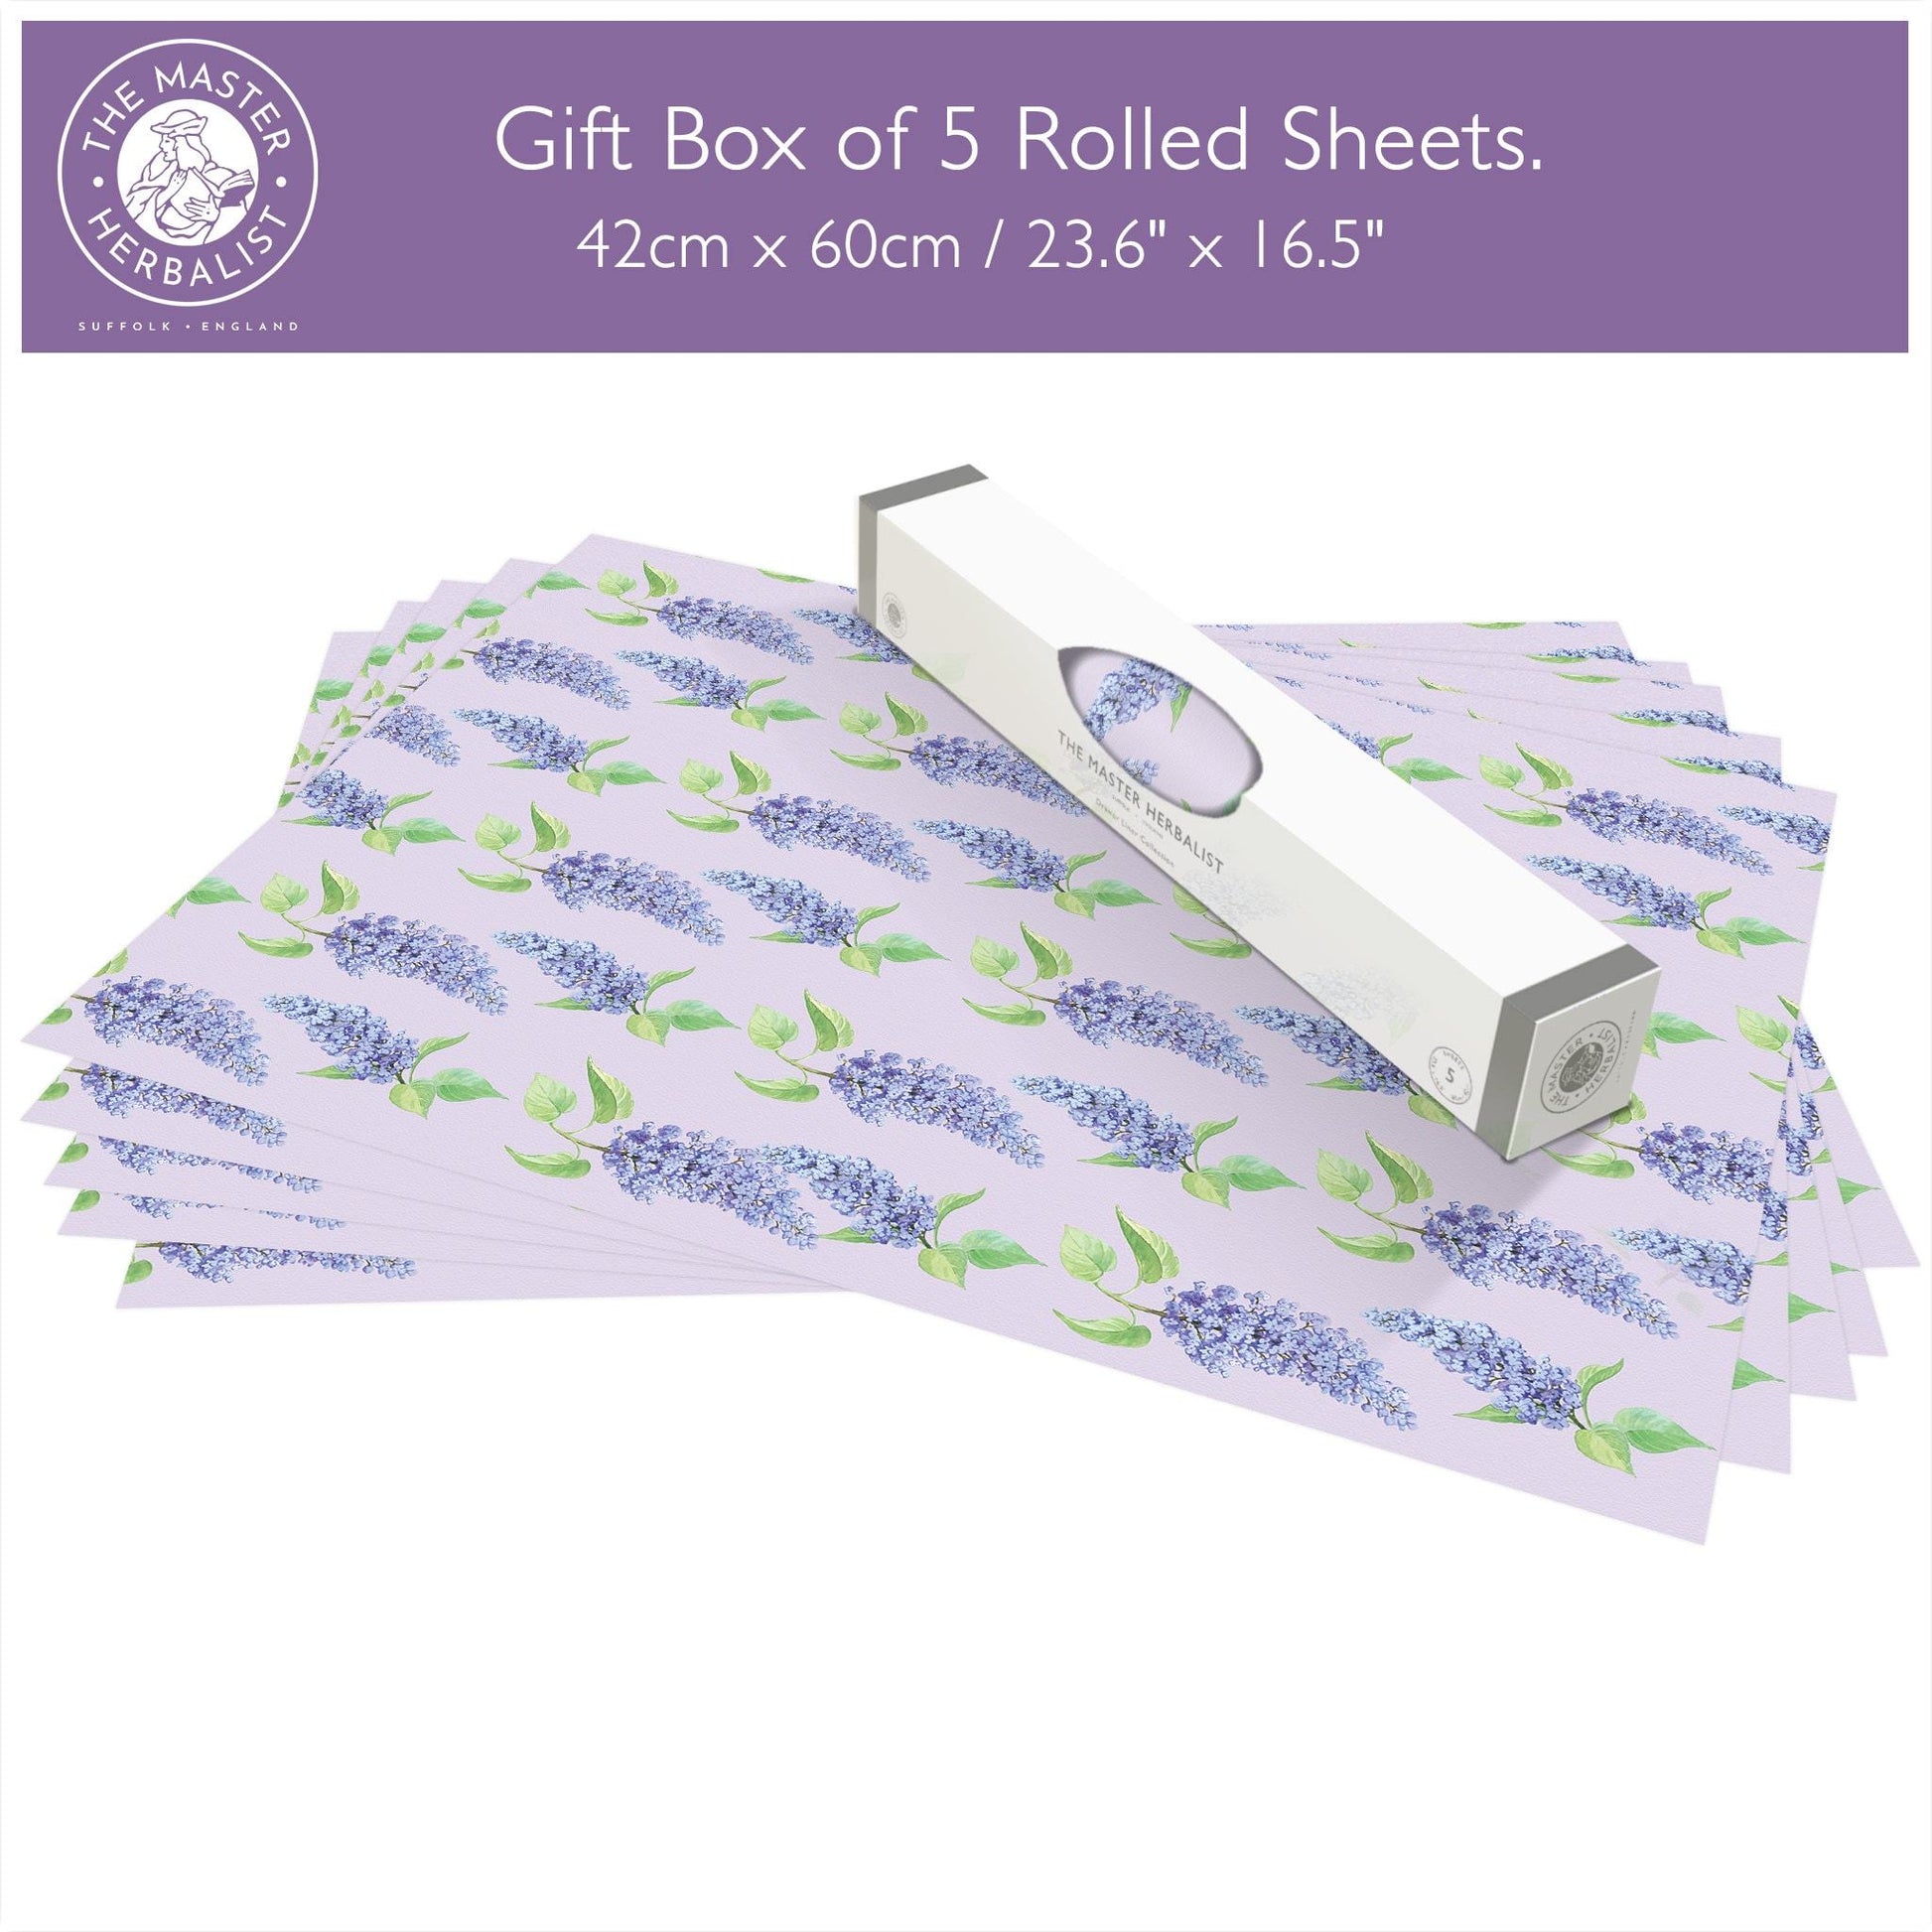 THE MASTER HERBALIST LILAC Fragrance SCENTED Drawer Liners in a floral LILAC Design. Made in Britain.